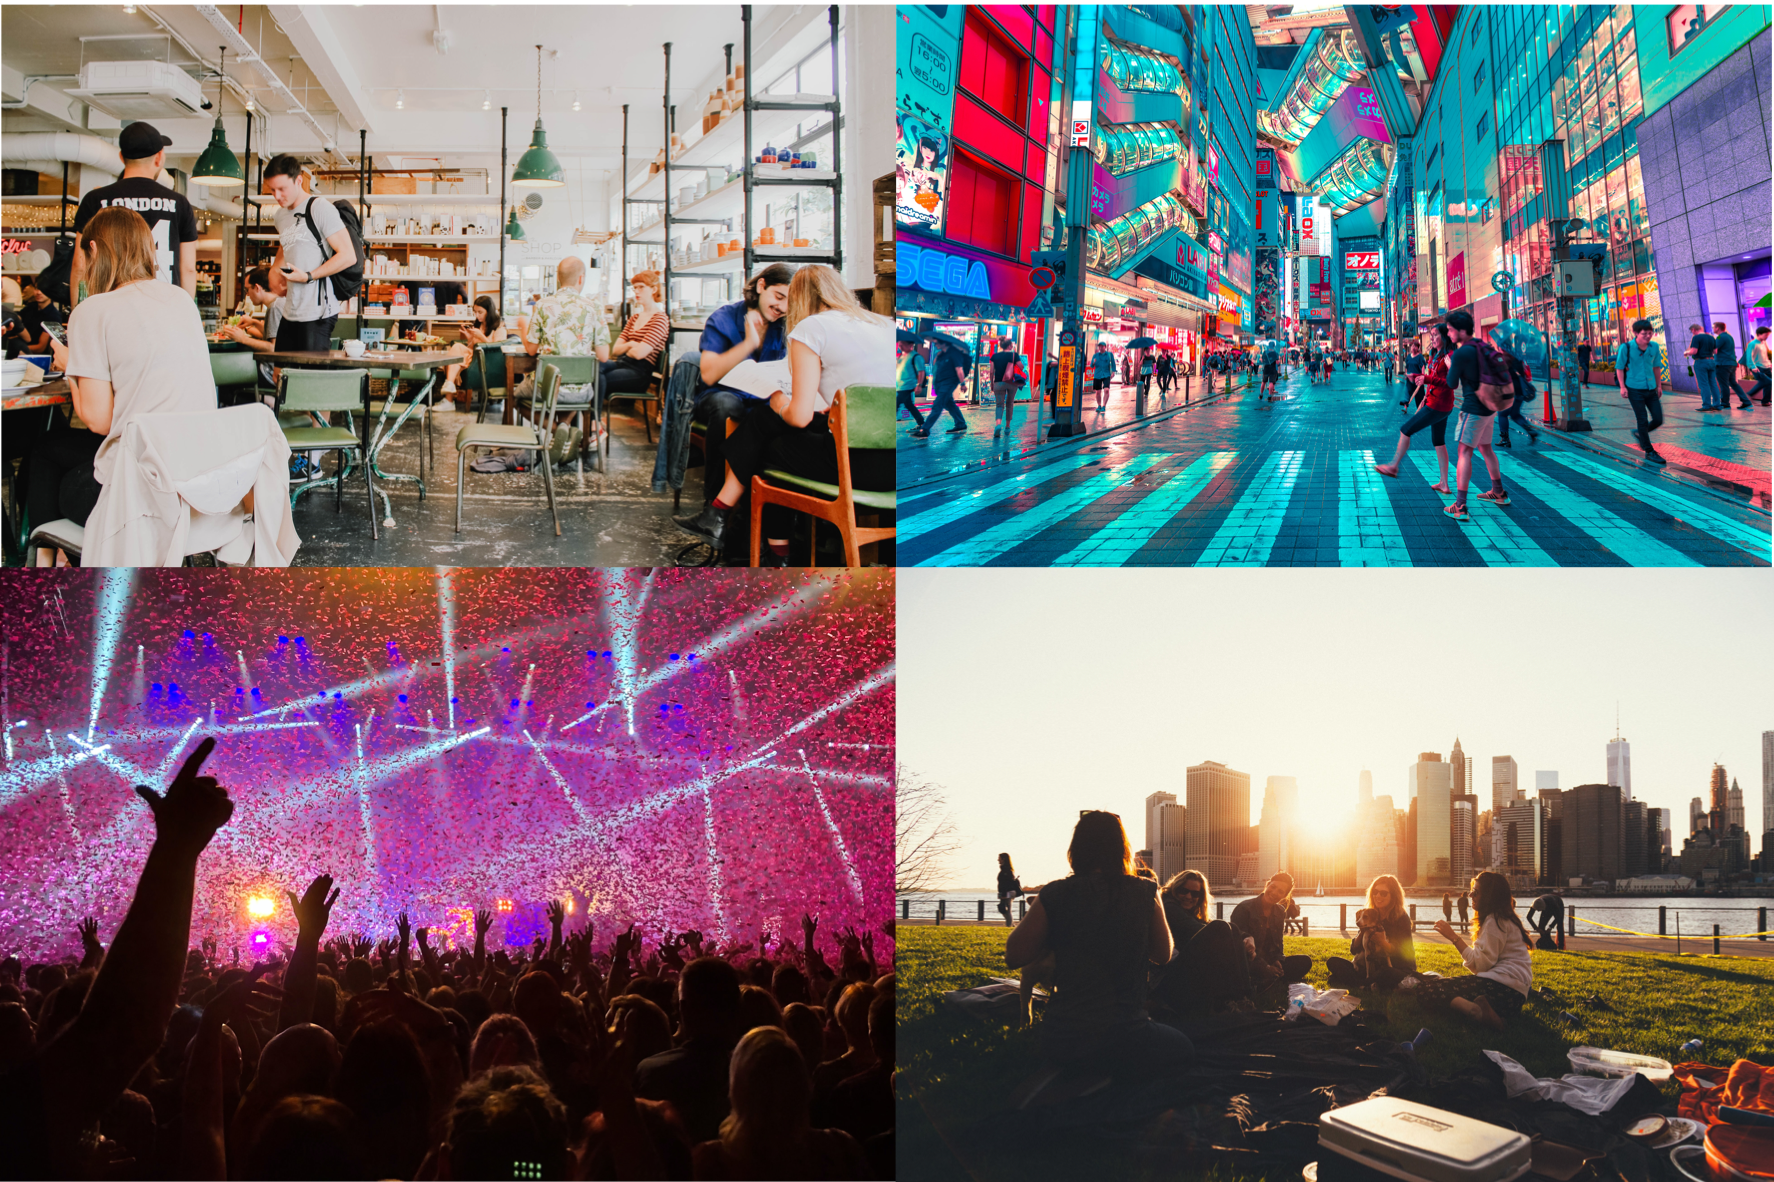 A collage of 4 pictures showing people enjoying live in the restaurant, shopping street, during a concert and a picnic